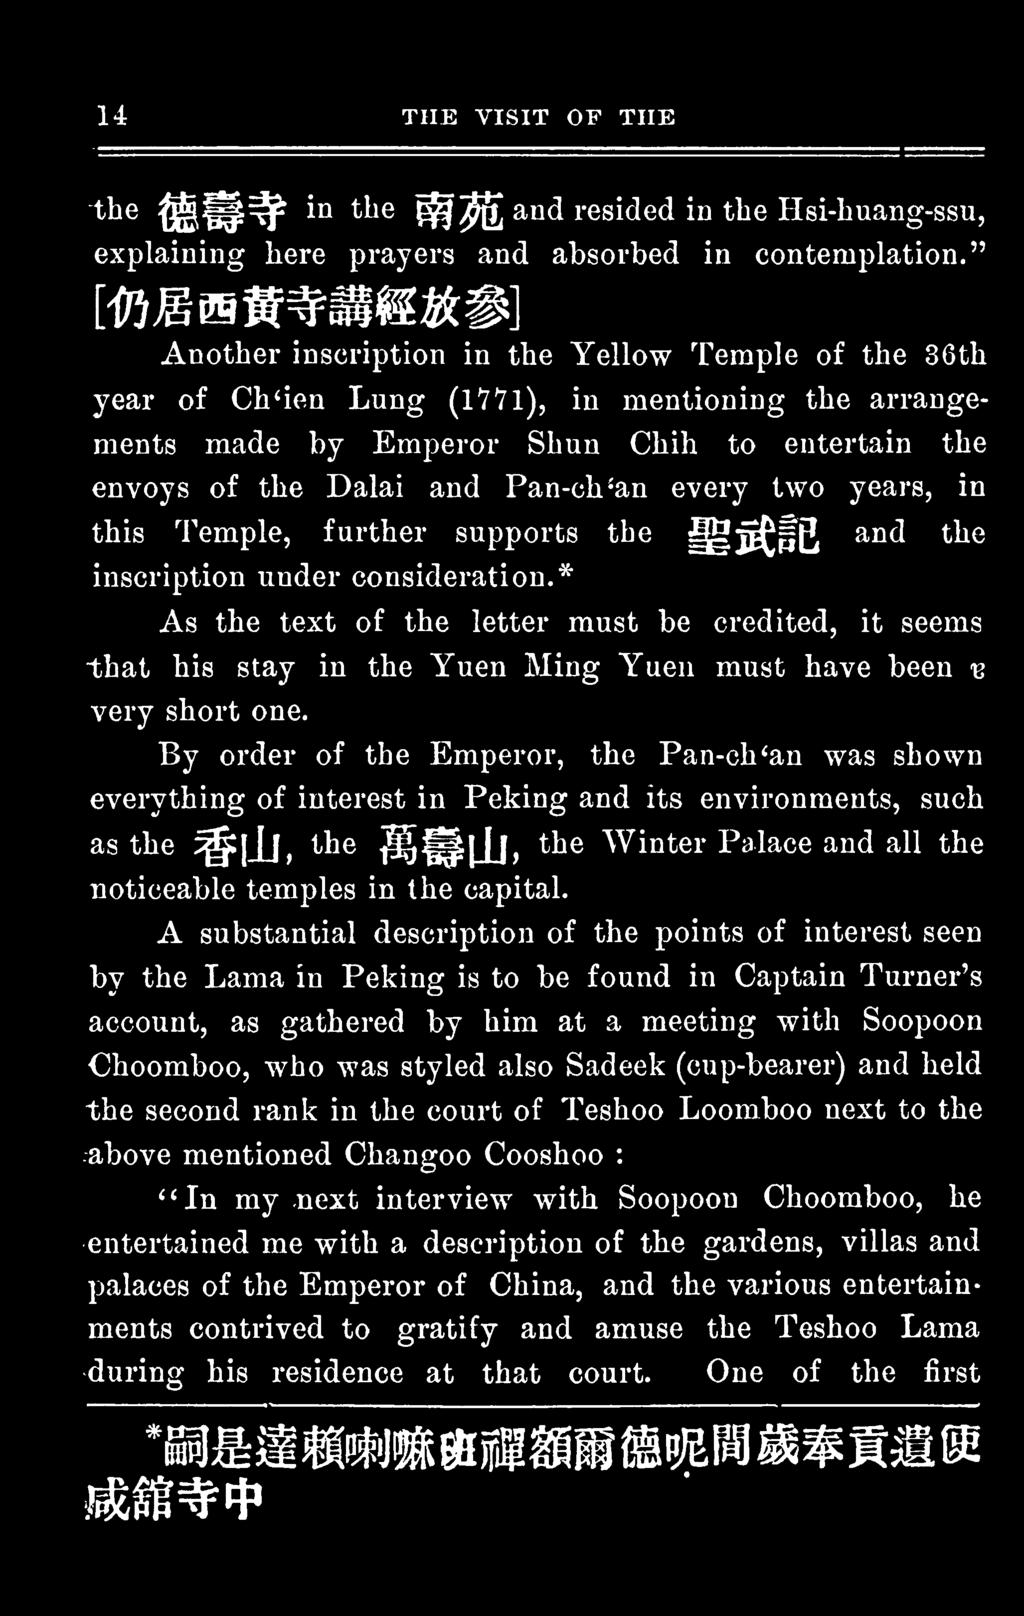 By order of the Emperor, the Pan-ch'an was shown everything of interest in Peking and its environments, such as the [Jj, the ^ Jj, the Winter Palace and all the noticeable temples in the capital.